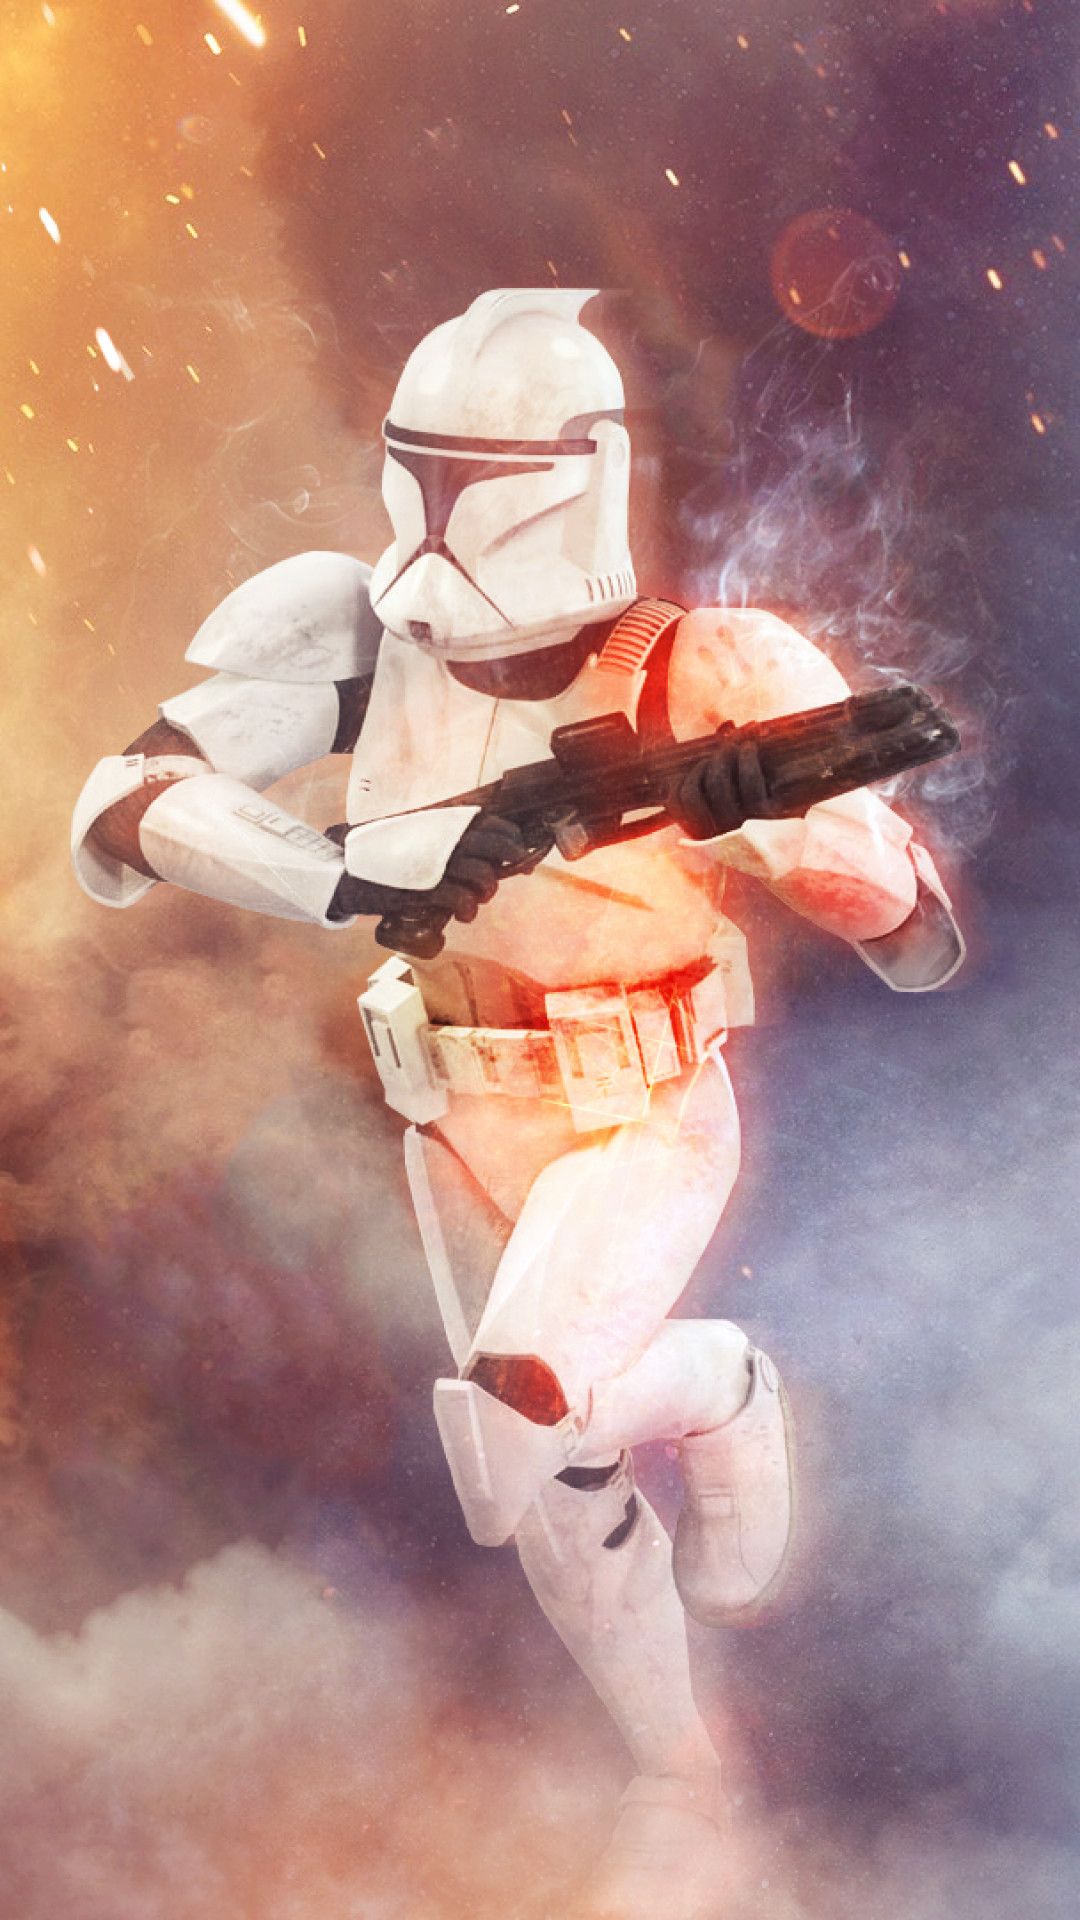 1080x1920, Amazing Backgrounds Of The Day - Star Wars Clone Trooper Wallpaper Iphone - HD Wallpaper 